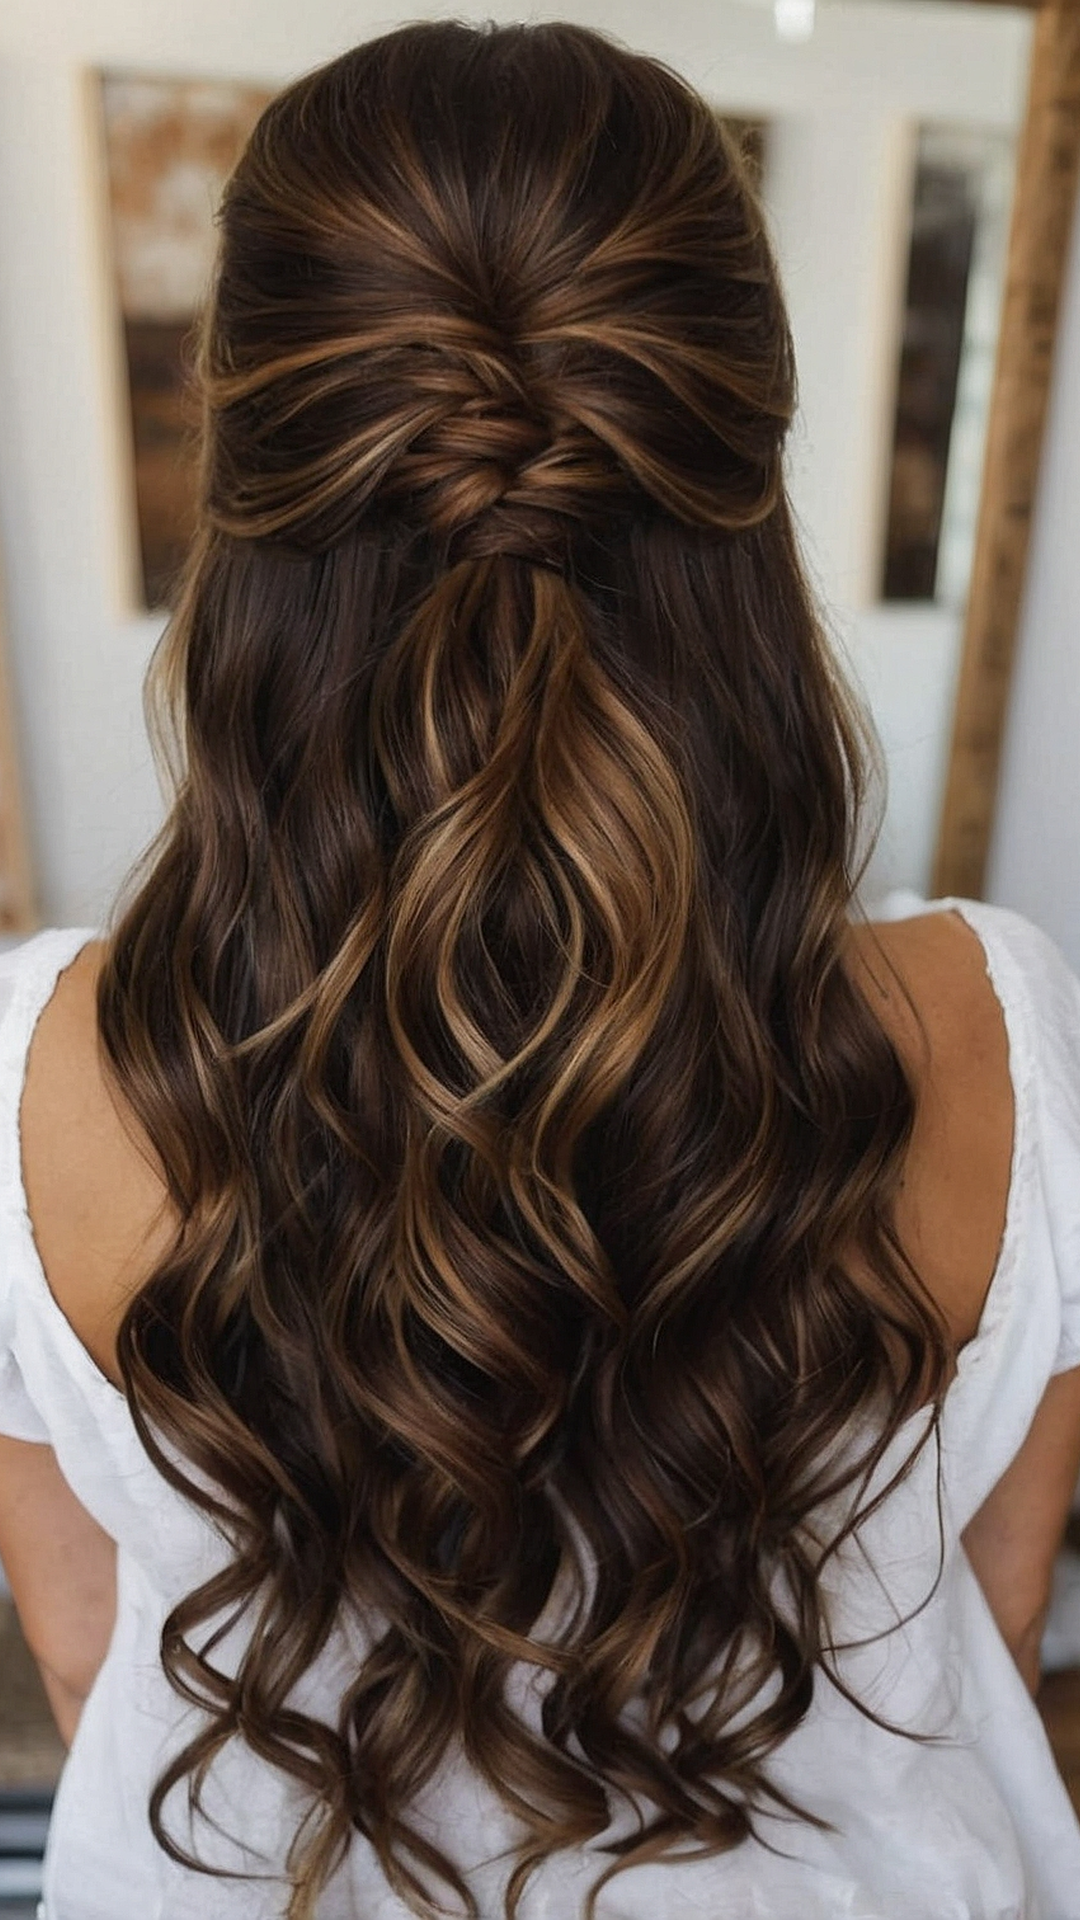 Curves and Curls: Wavy Hair Inspiration